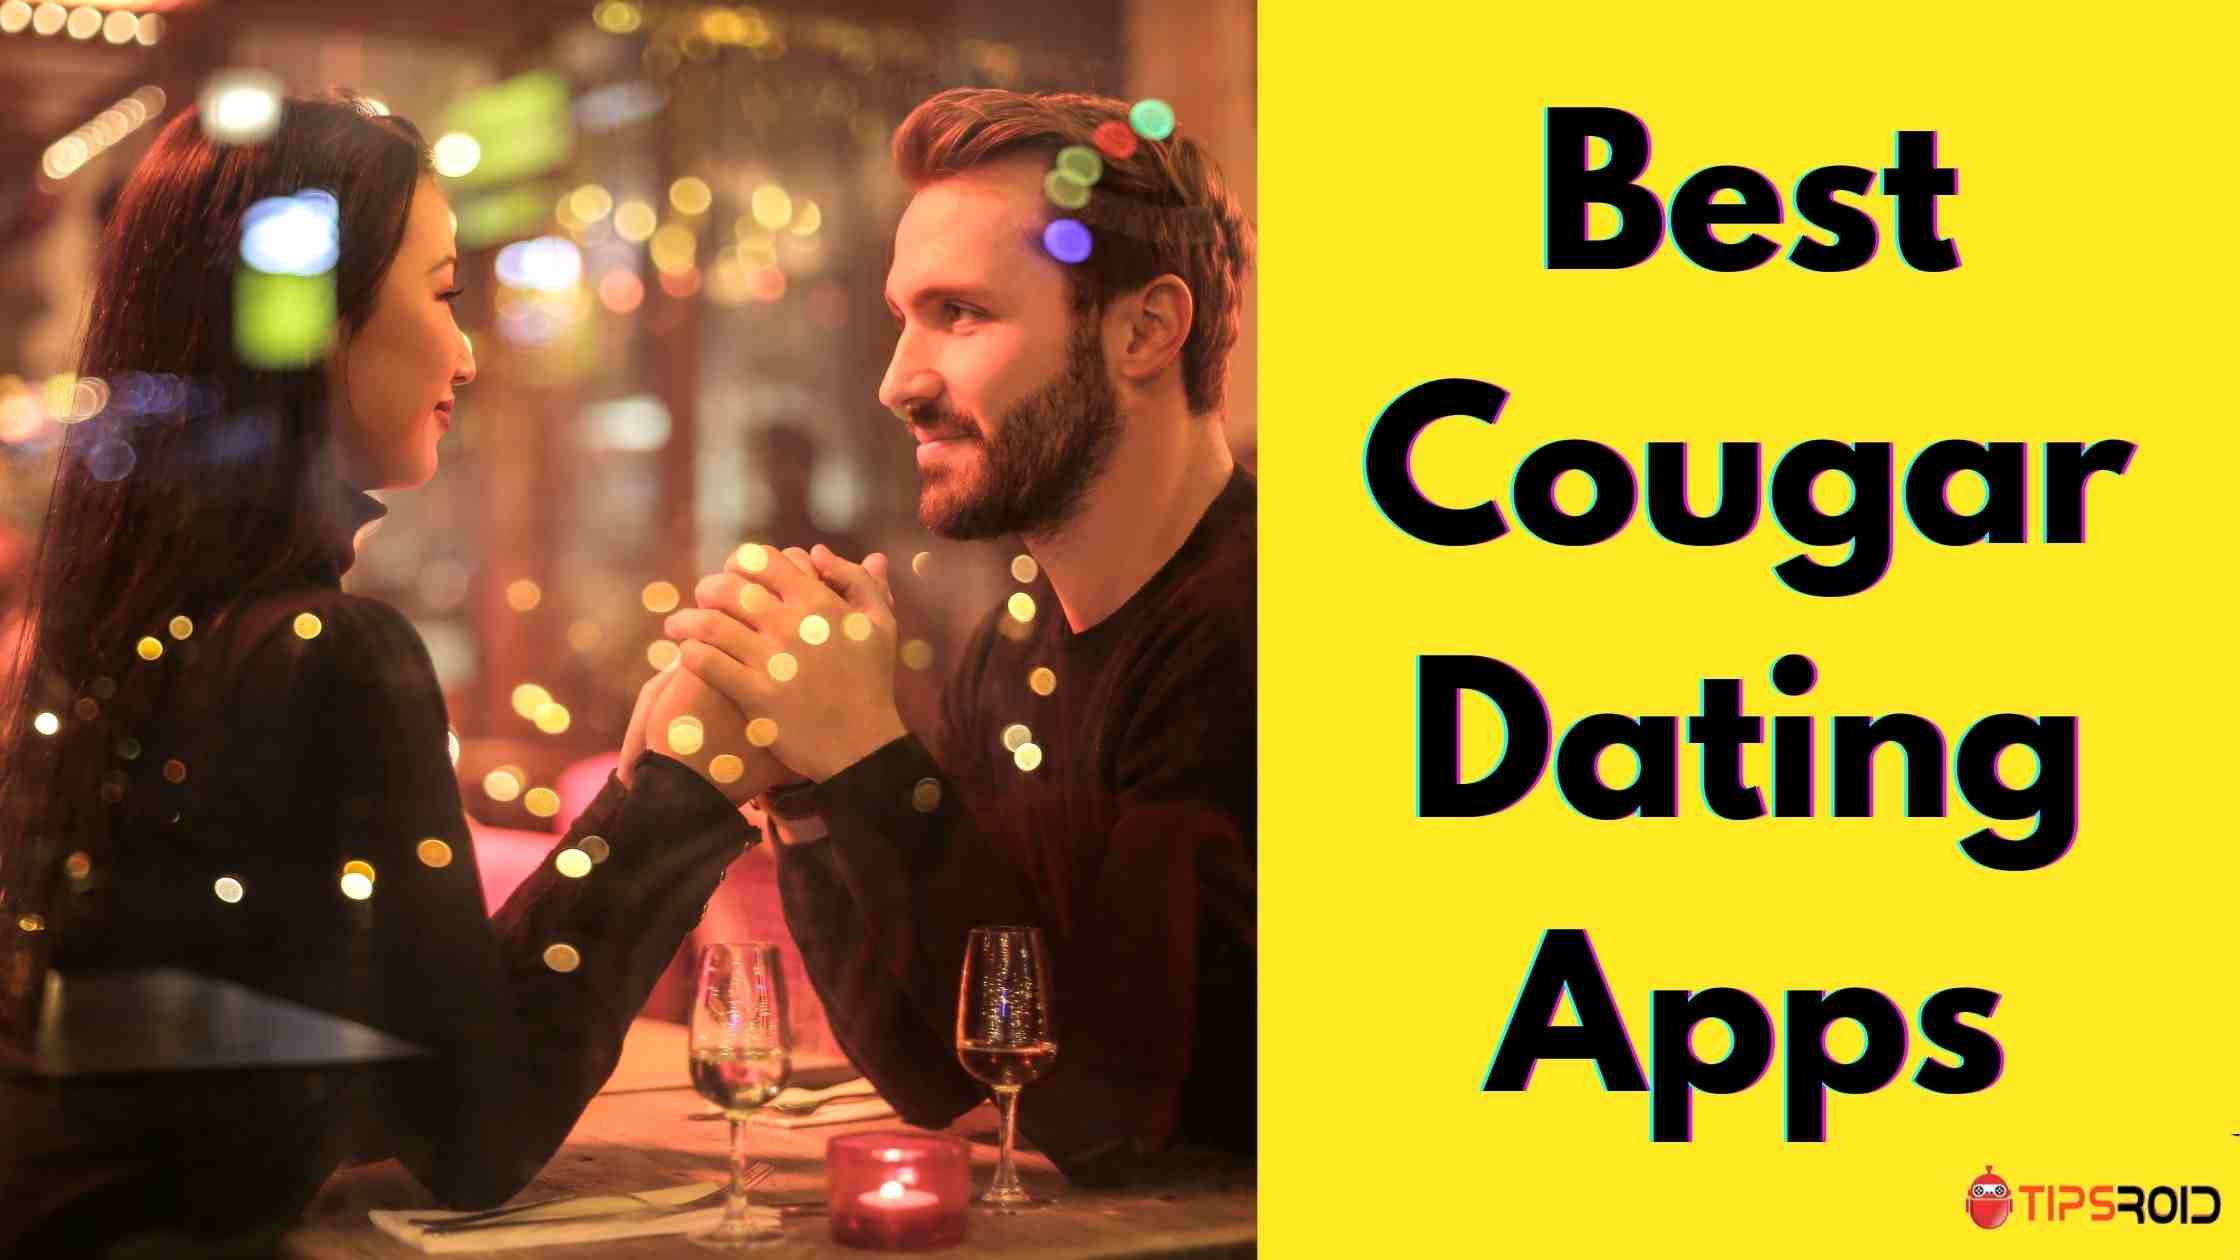 8 Best Cougar Dating Apps For Android & iPhone